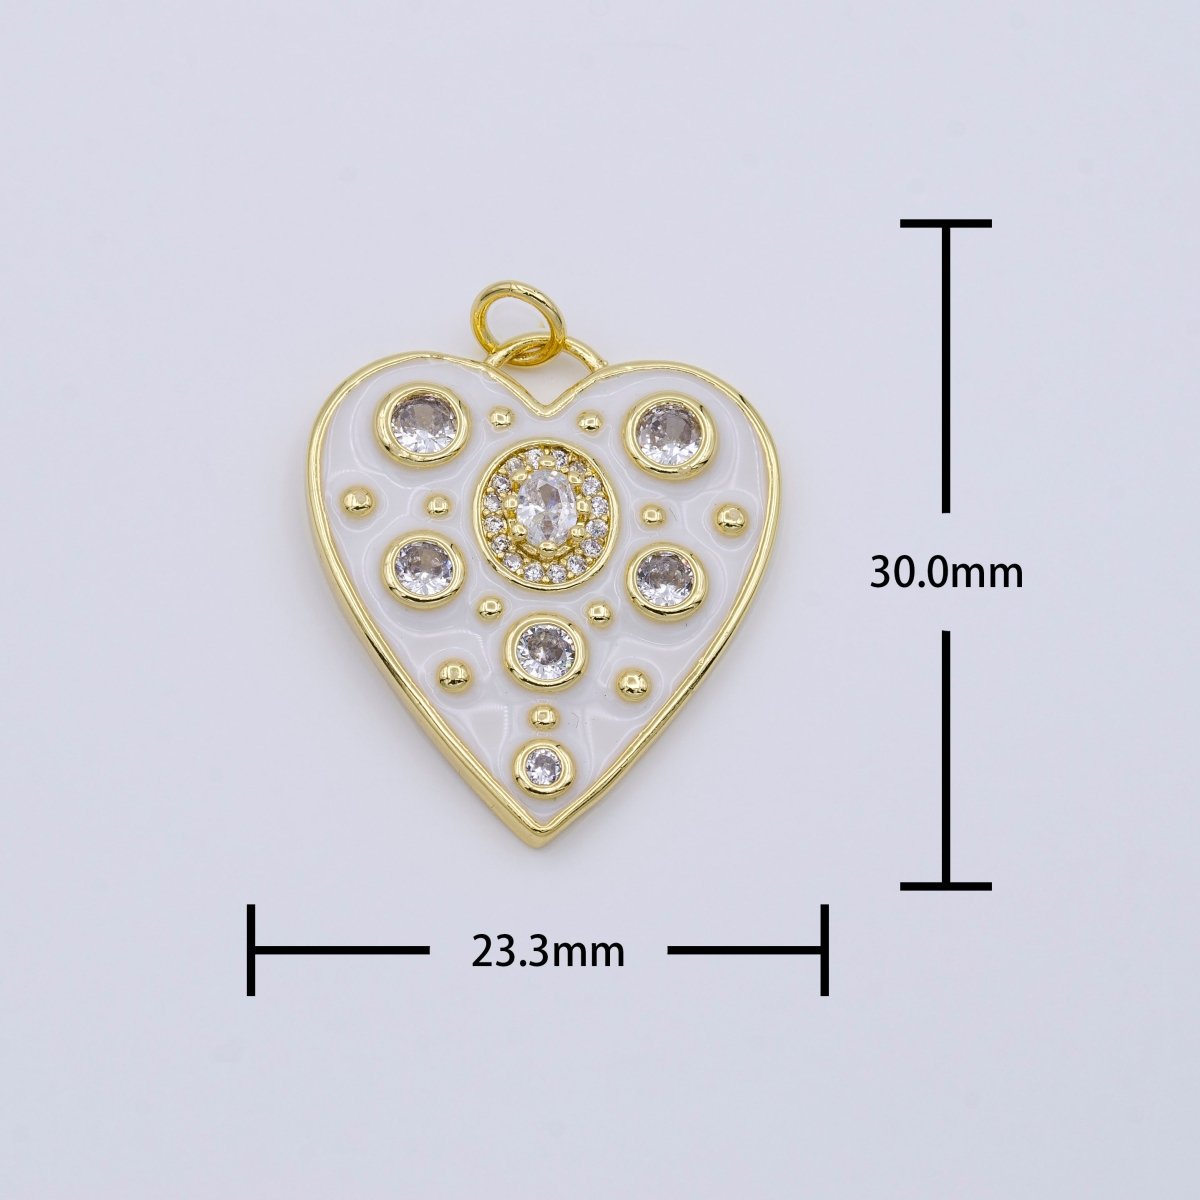 Dainty White Enamel Heart Charm, Gold Filled Over Brass Heart Charm with CZ Bubble for Necklace Bracelet Earring Supply AC976 - DLUXCA